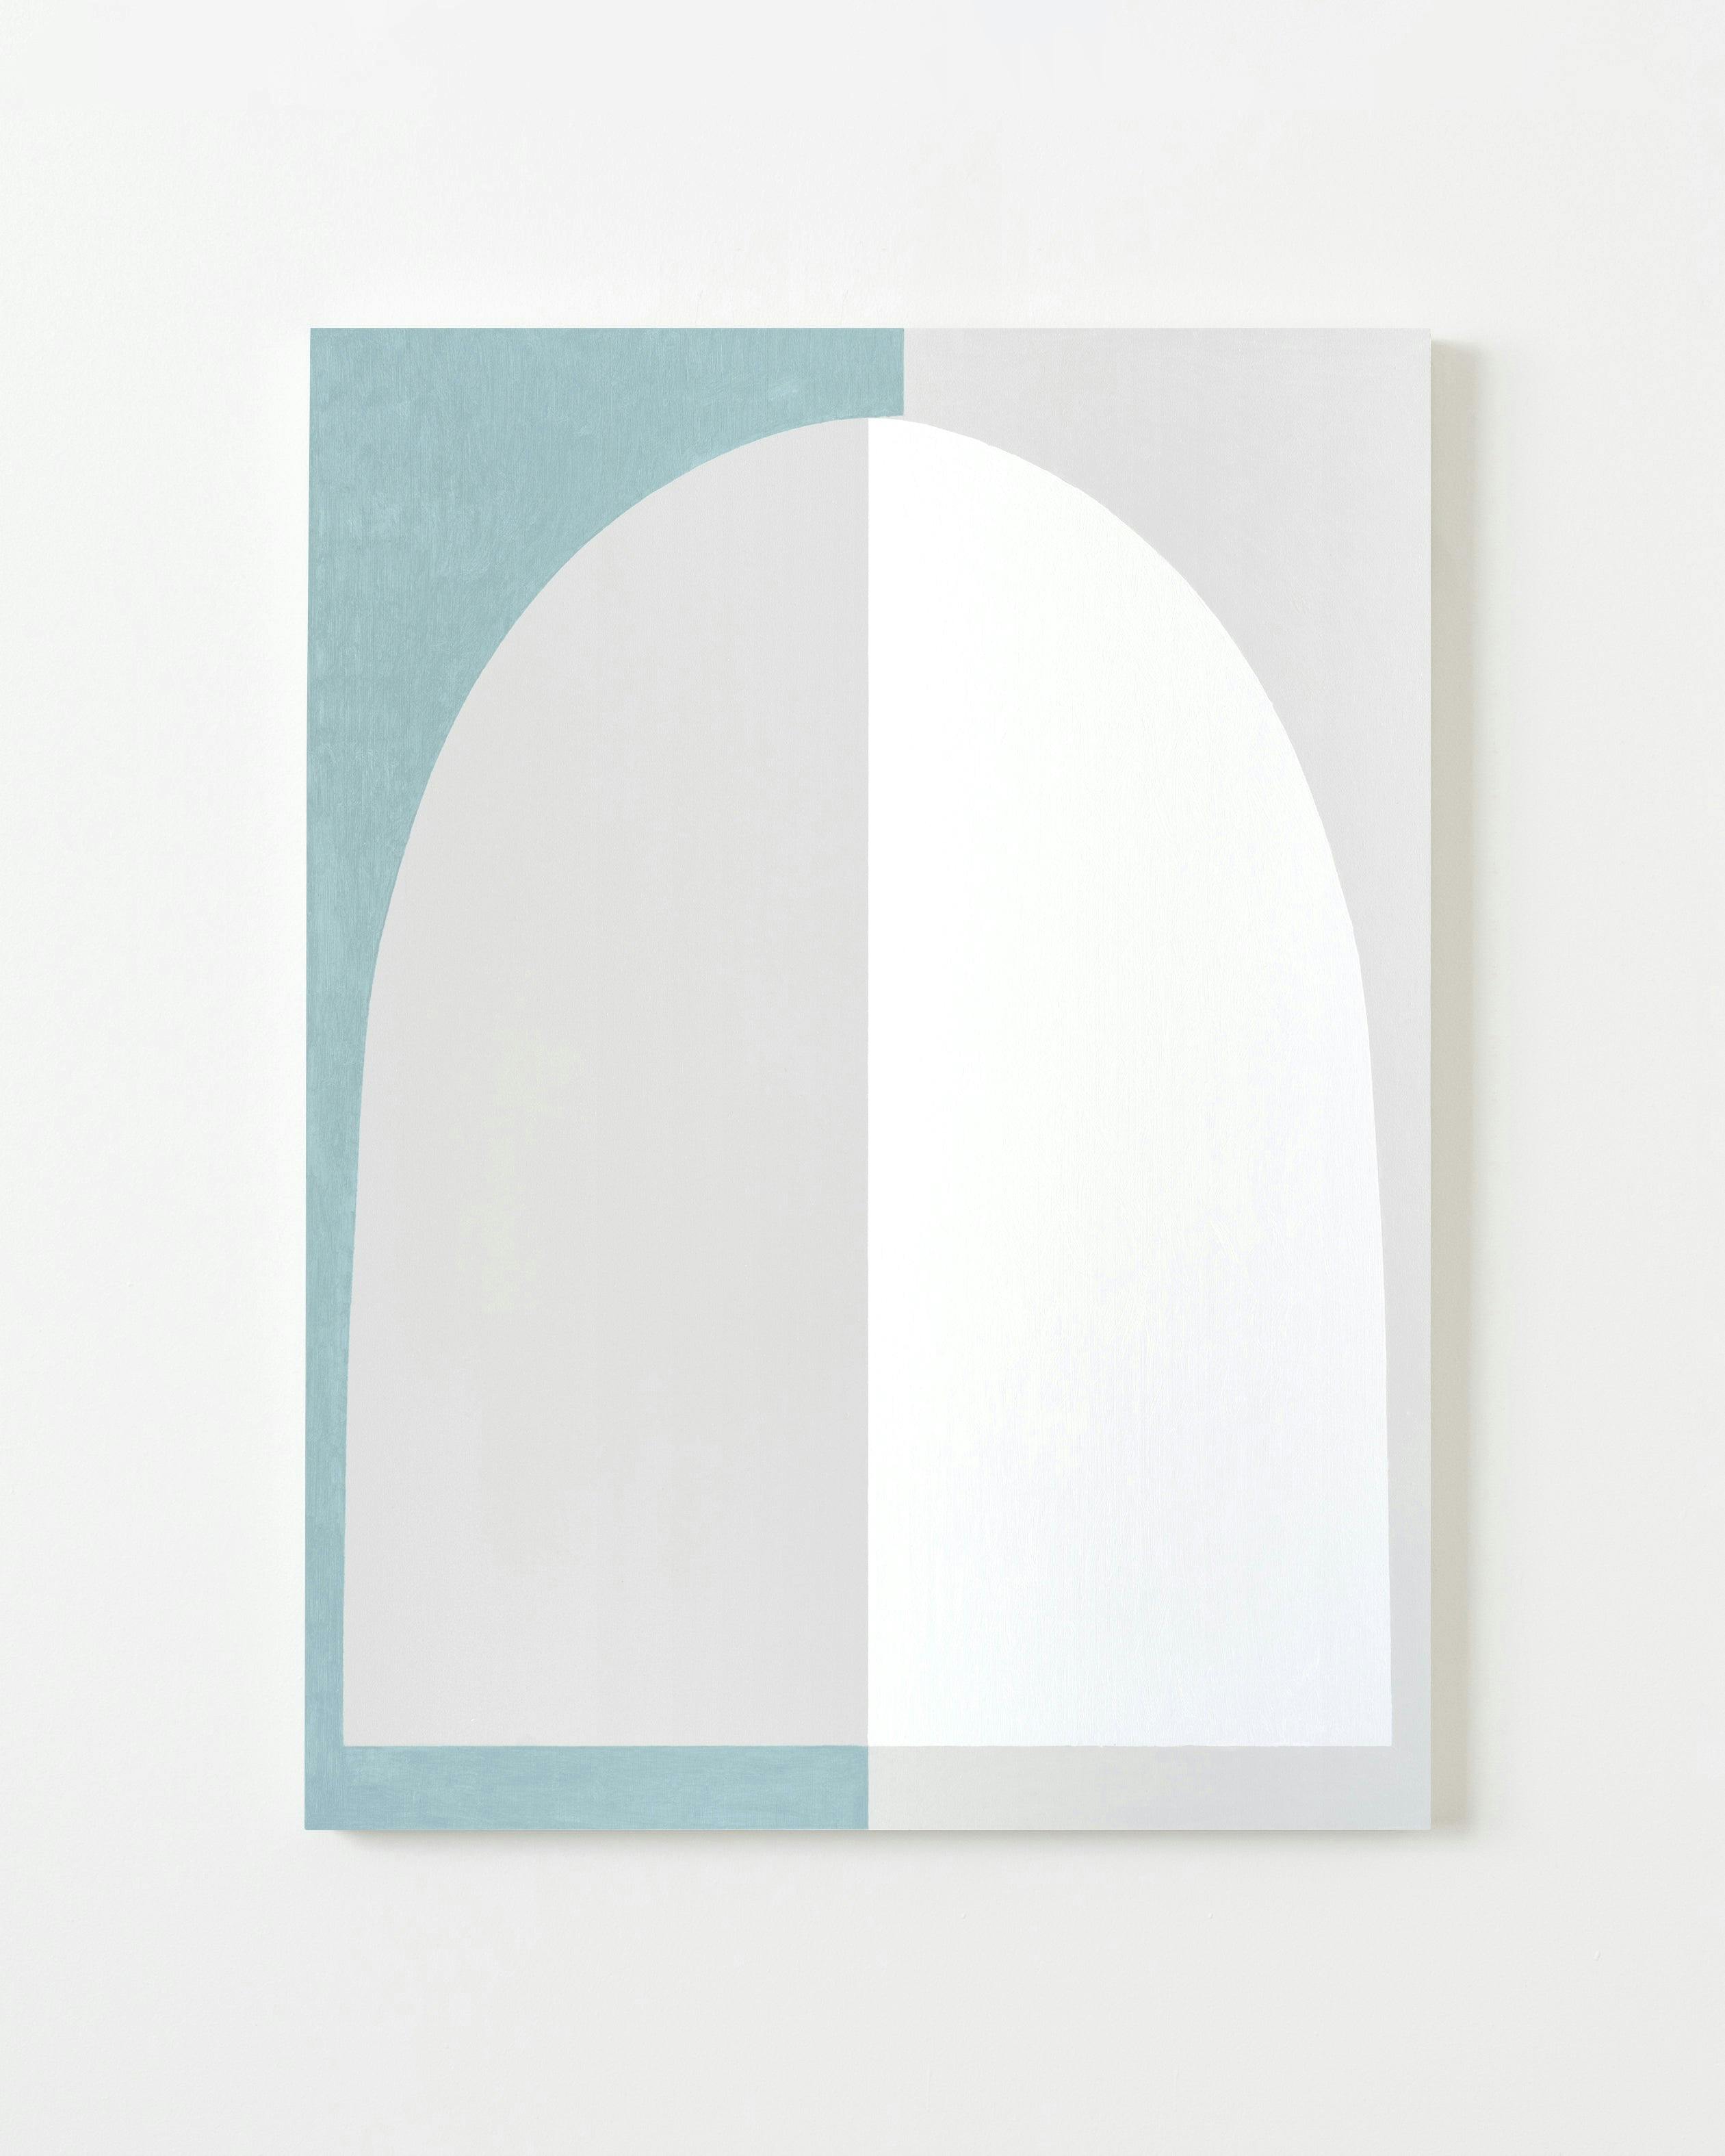 Aschely Vaughan Cone - Teal Arch in White Light - Painting